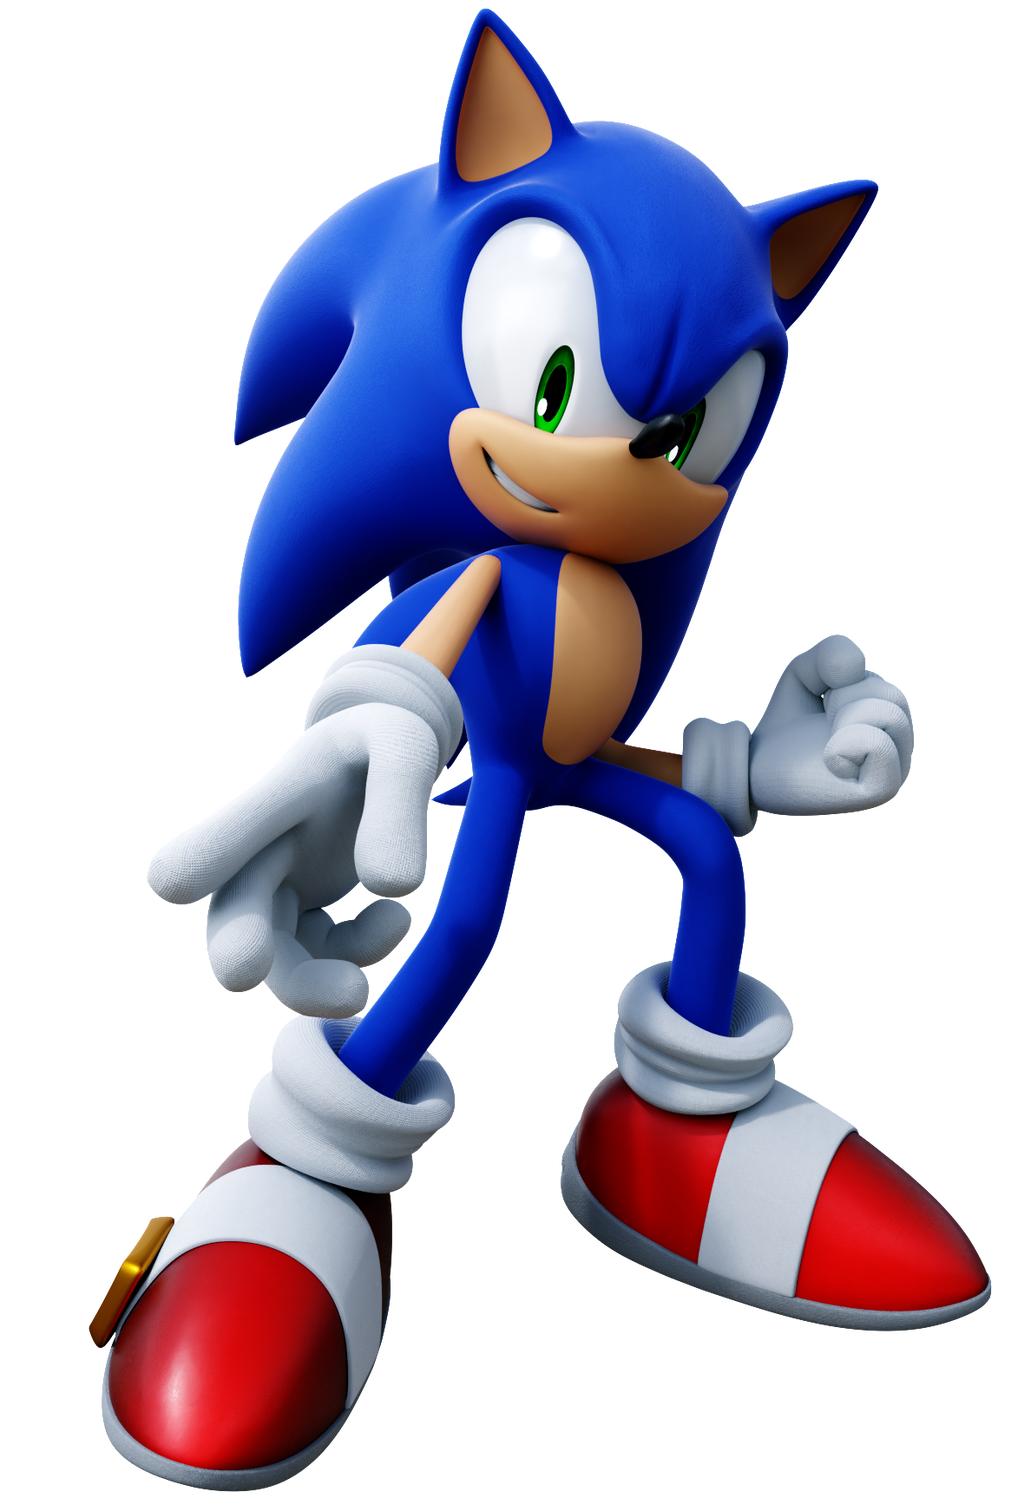 My Take On The Sonic Unleashed Pose By Geki696 On Deviantart